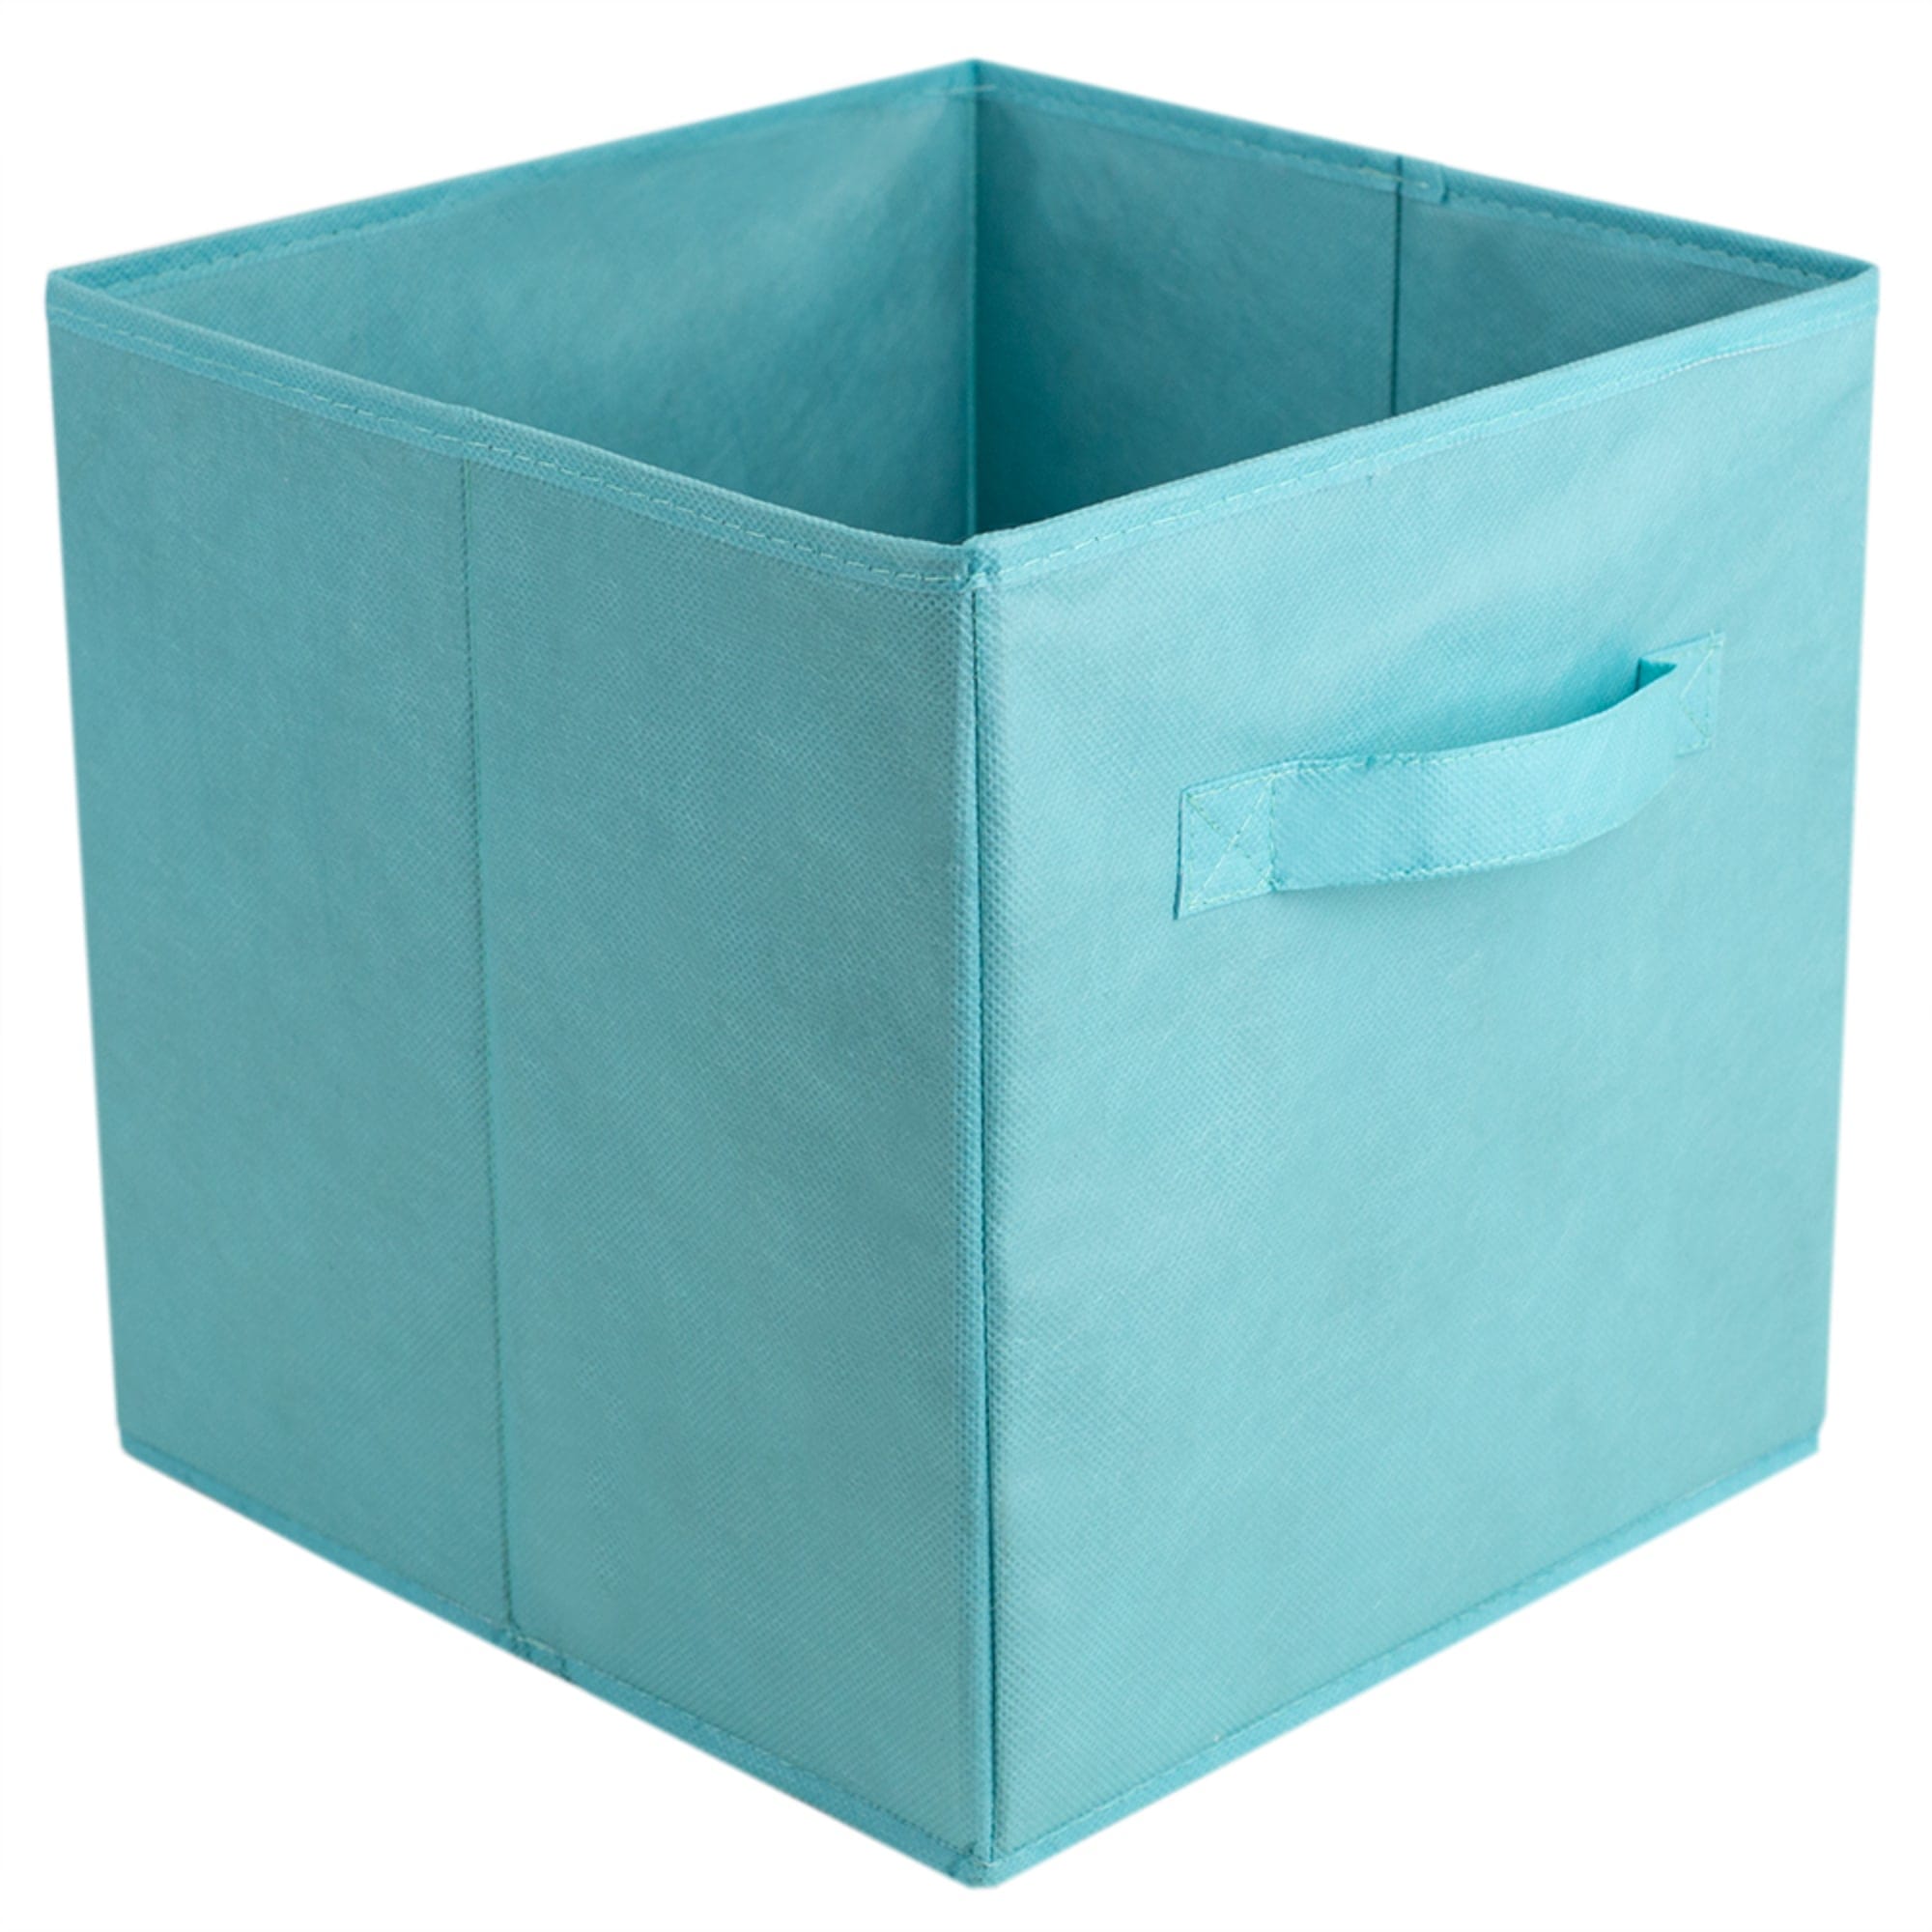 Home Basics Collapsible and Foldable Non-Woven Storage Cube, Turquoise $3.00 EACH, CASE PACK OF 12